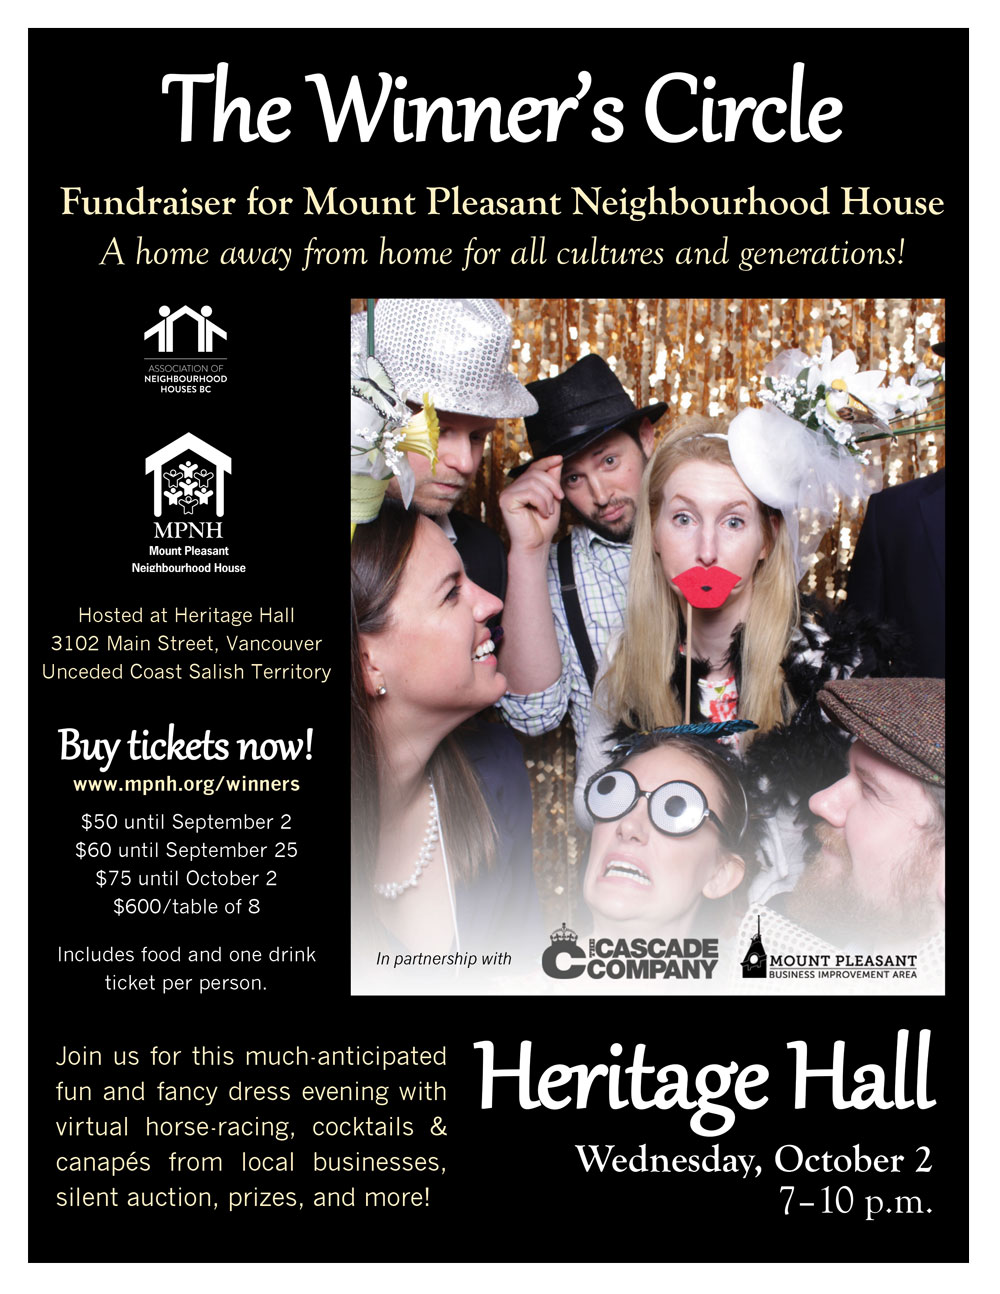 An image of the poster with event details, featuring people in fancy dress and making funny faces with photo booth props, in front of a gold glittery background.